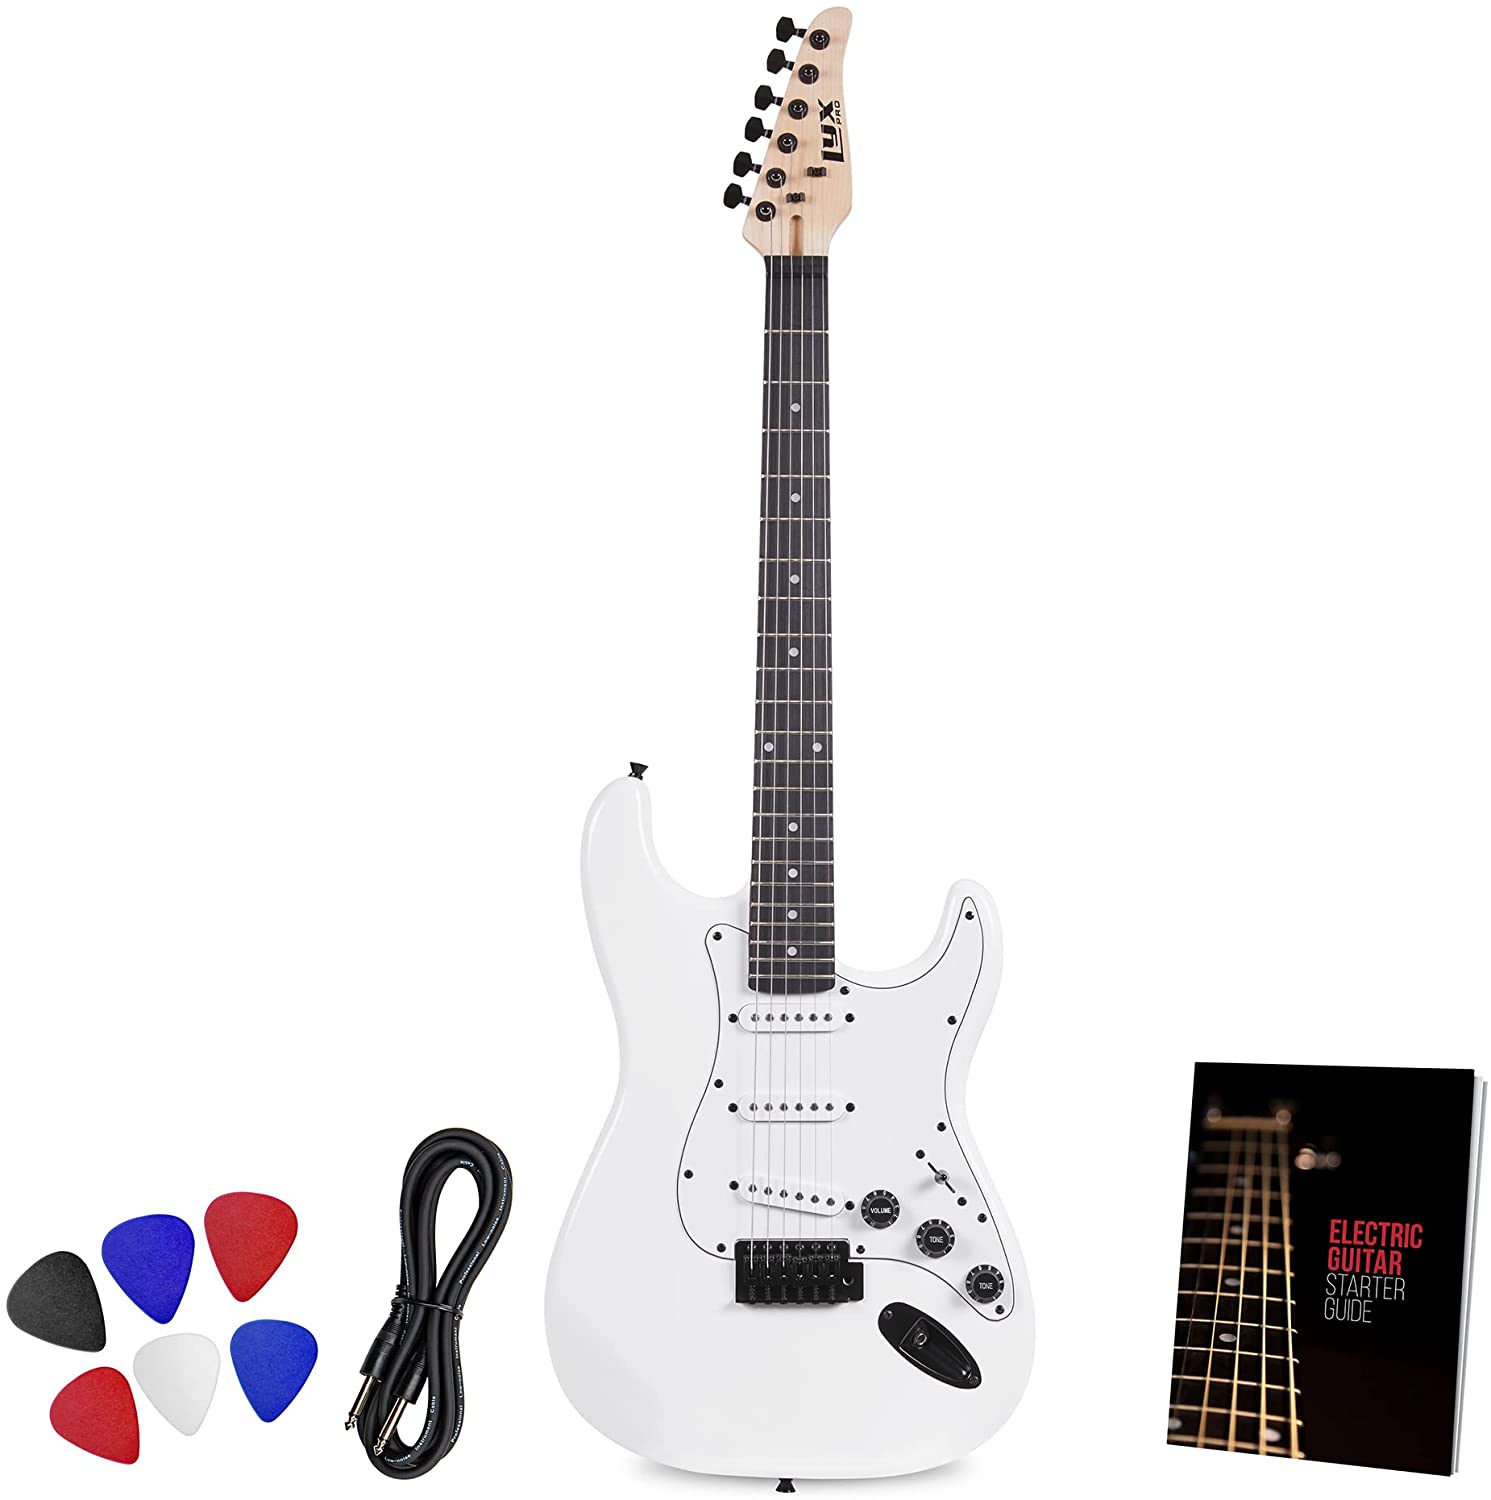 LyxPro CS 39” Electric Guitar Kit for Beginner, Intermediate & Pro Players with Guitar, Amp Cable, 6 Picks & Learner’s Guide | Solid Wood Body